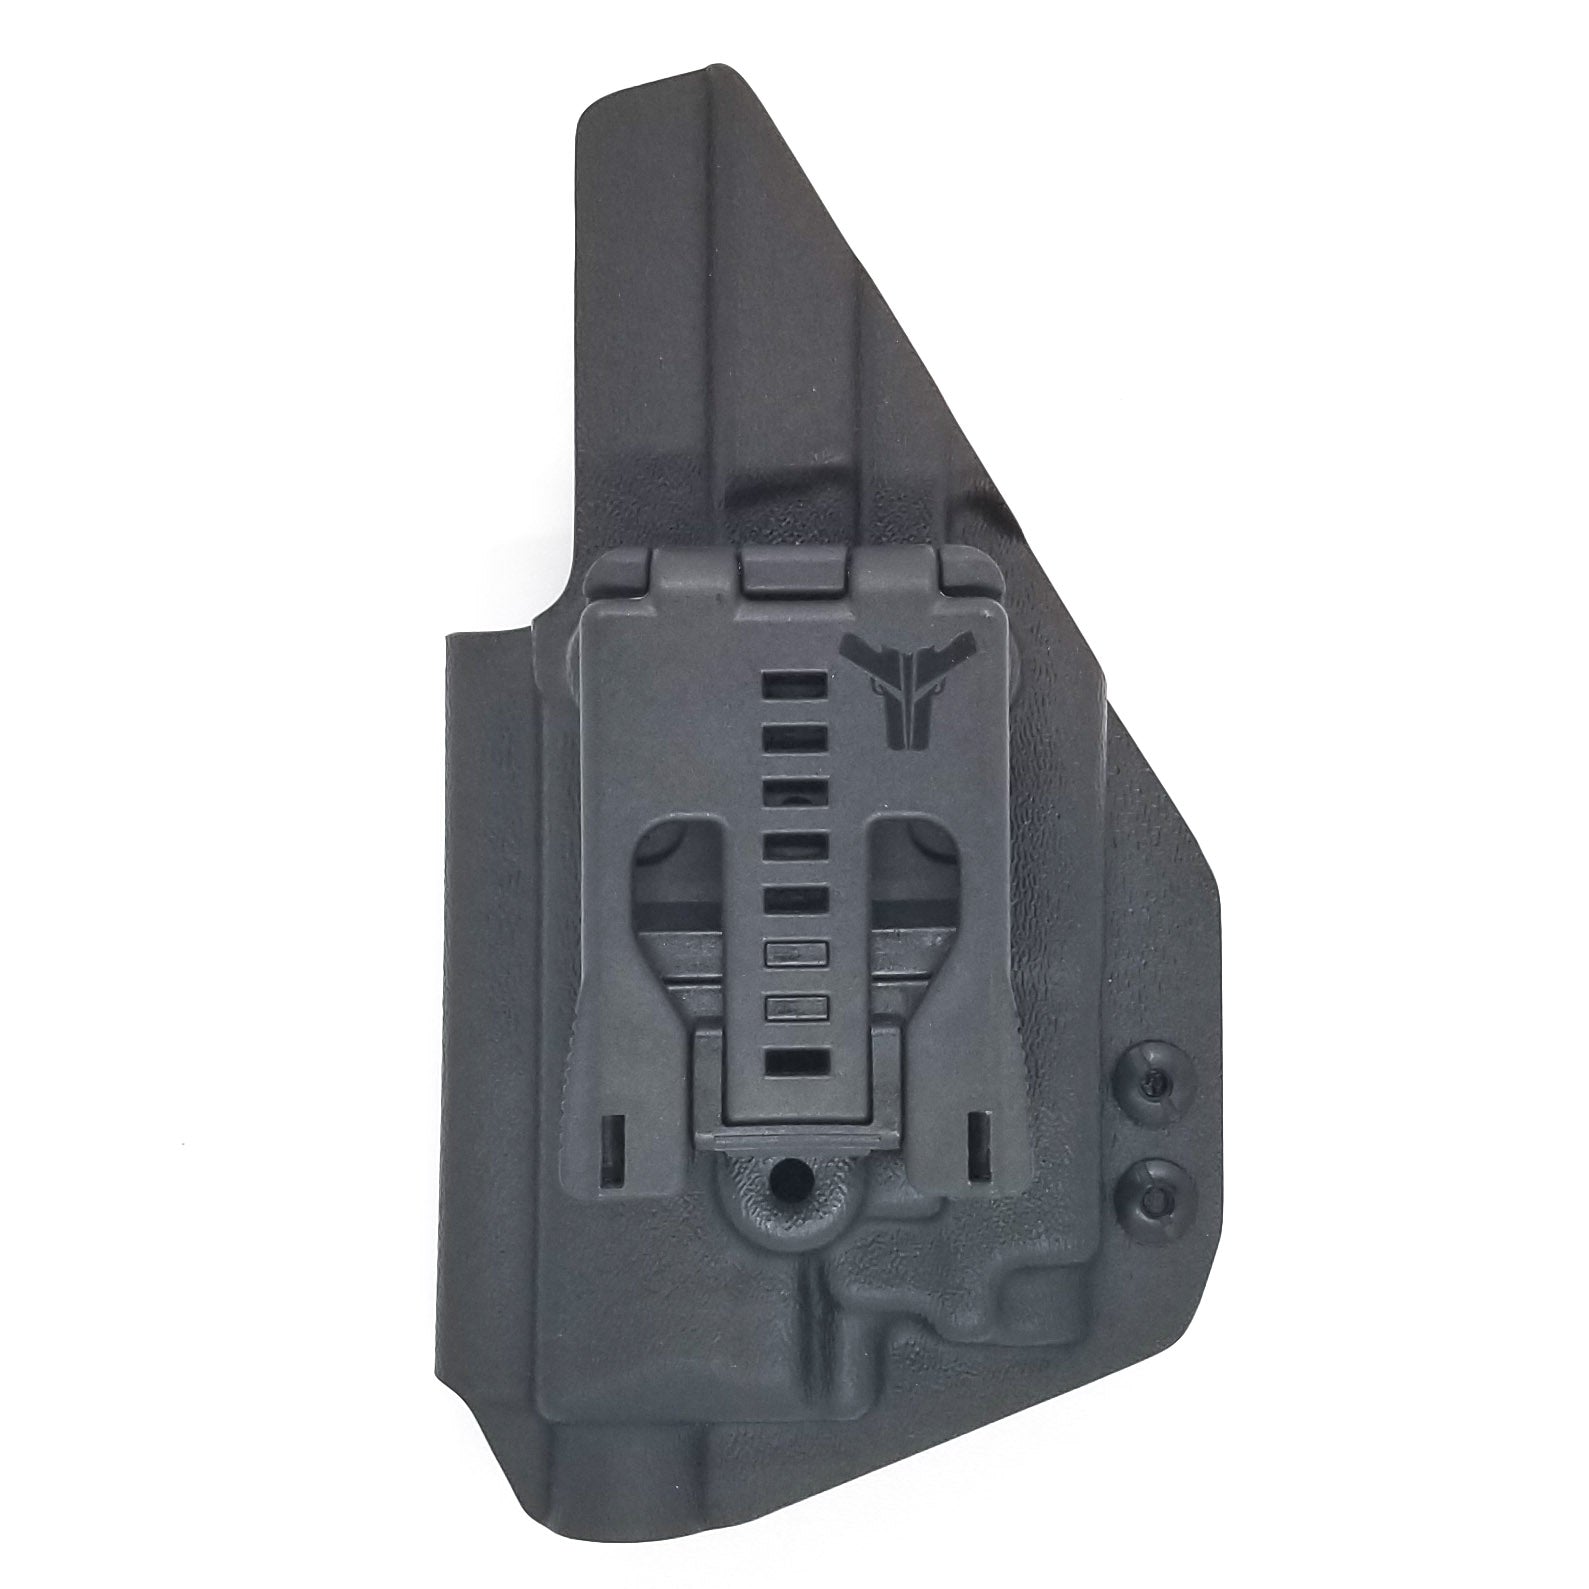 Best Outside Waistband Taco Style Holster for the FN 509 compact, 509 and 509 Tactical with the OLight PL-MINI 2 Valkyrie weapon mounted light Adjustable retention High sweat guard standard, .080 thick Kydex or Boltaron thermoplastic for durability